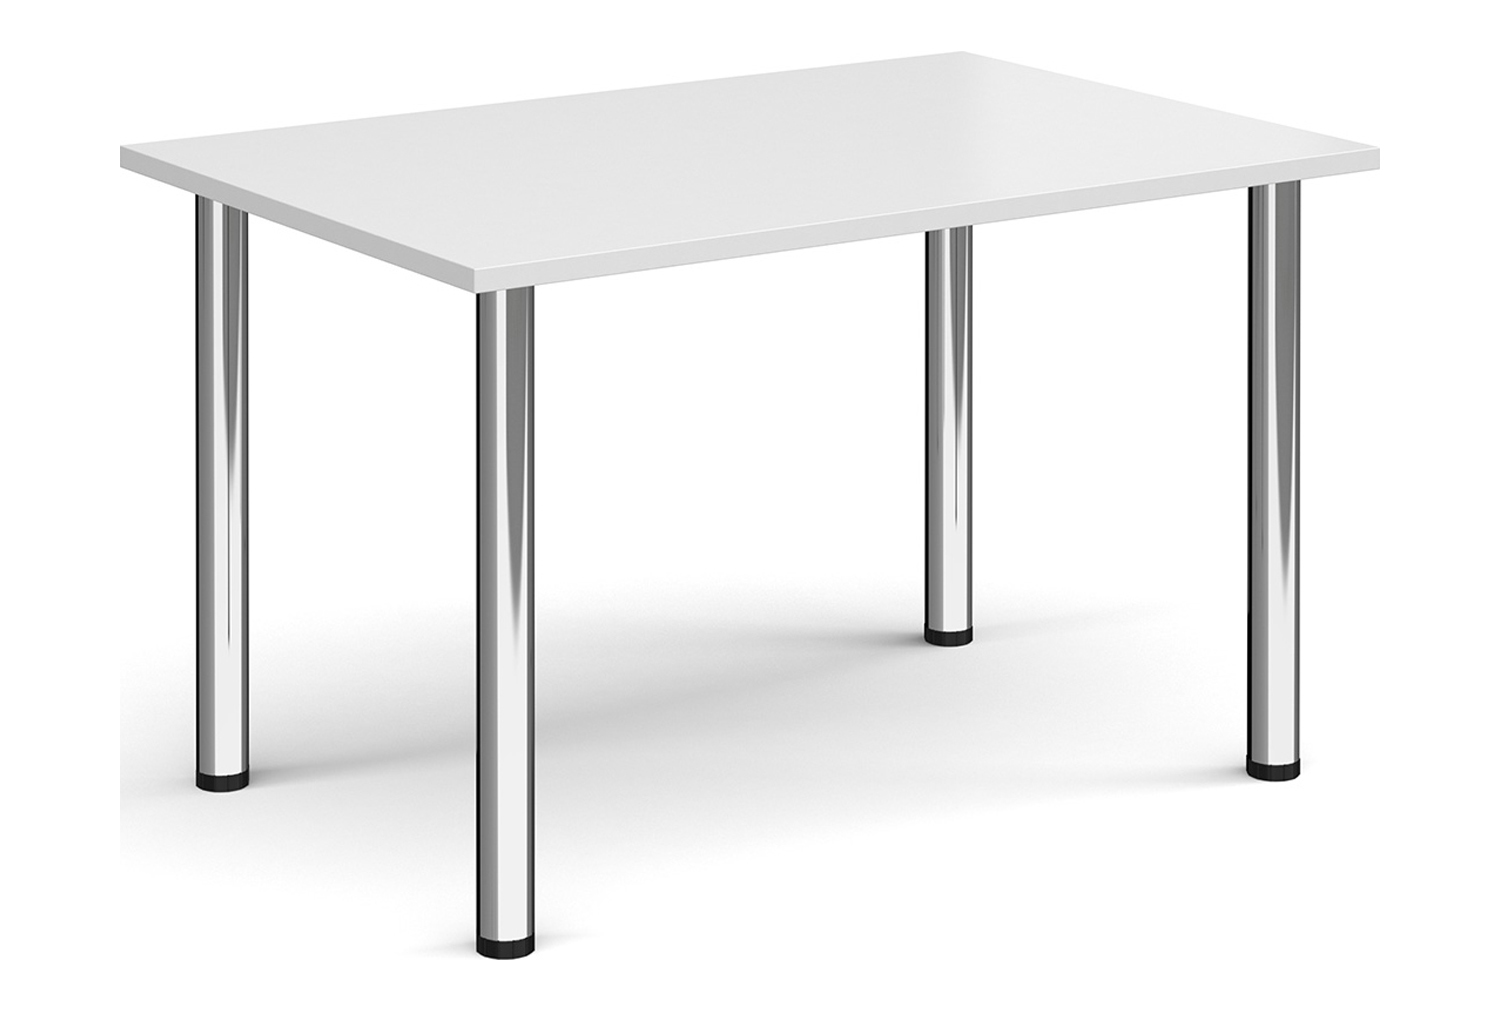 Pallas Rectangular Meeting Table, 120wx80dx73h (cm), Chrome Frame, White, Express Delivery